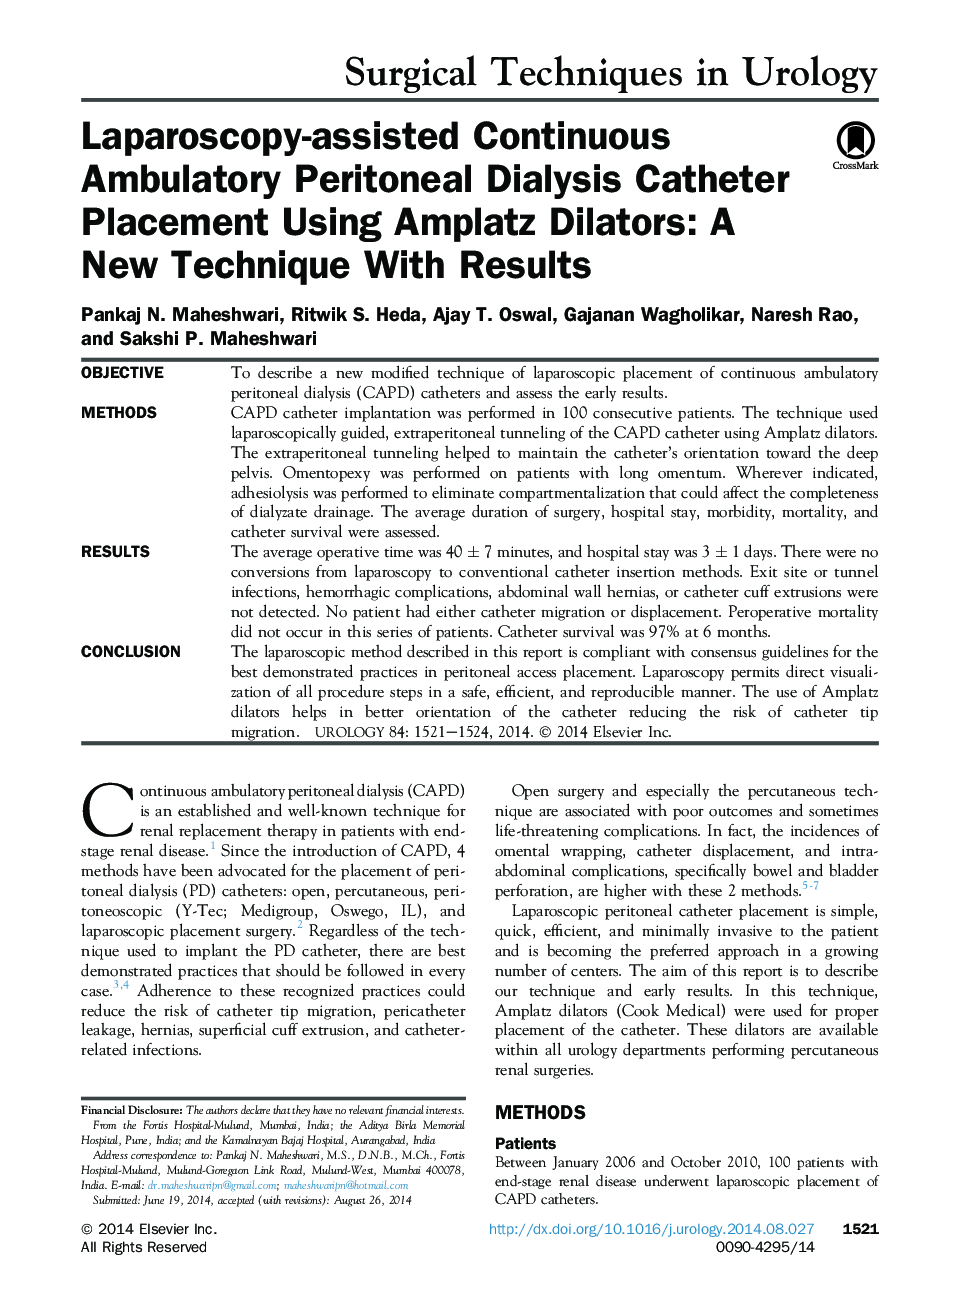 Laparoscopy-assisted Continuous Ambulatory Peritoneal Dialysis Catheter Placement Using Amplatz Dilators: A New Technique With Results 